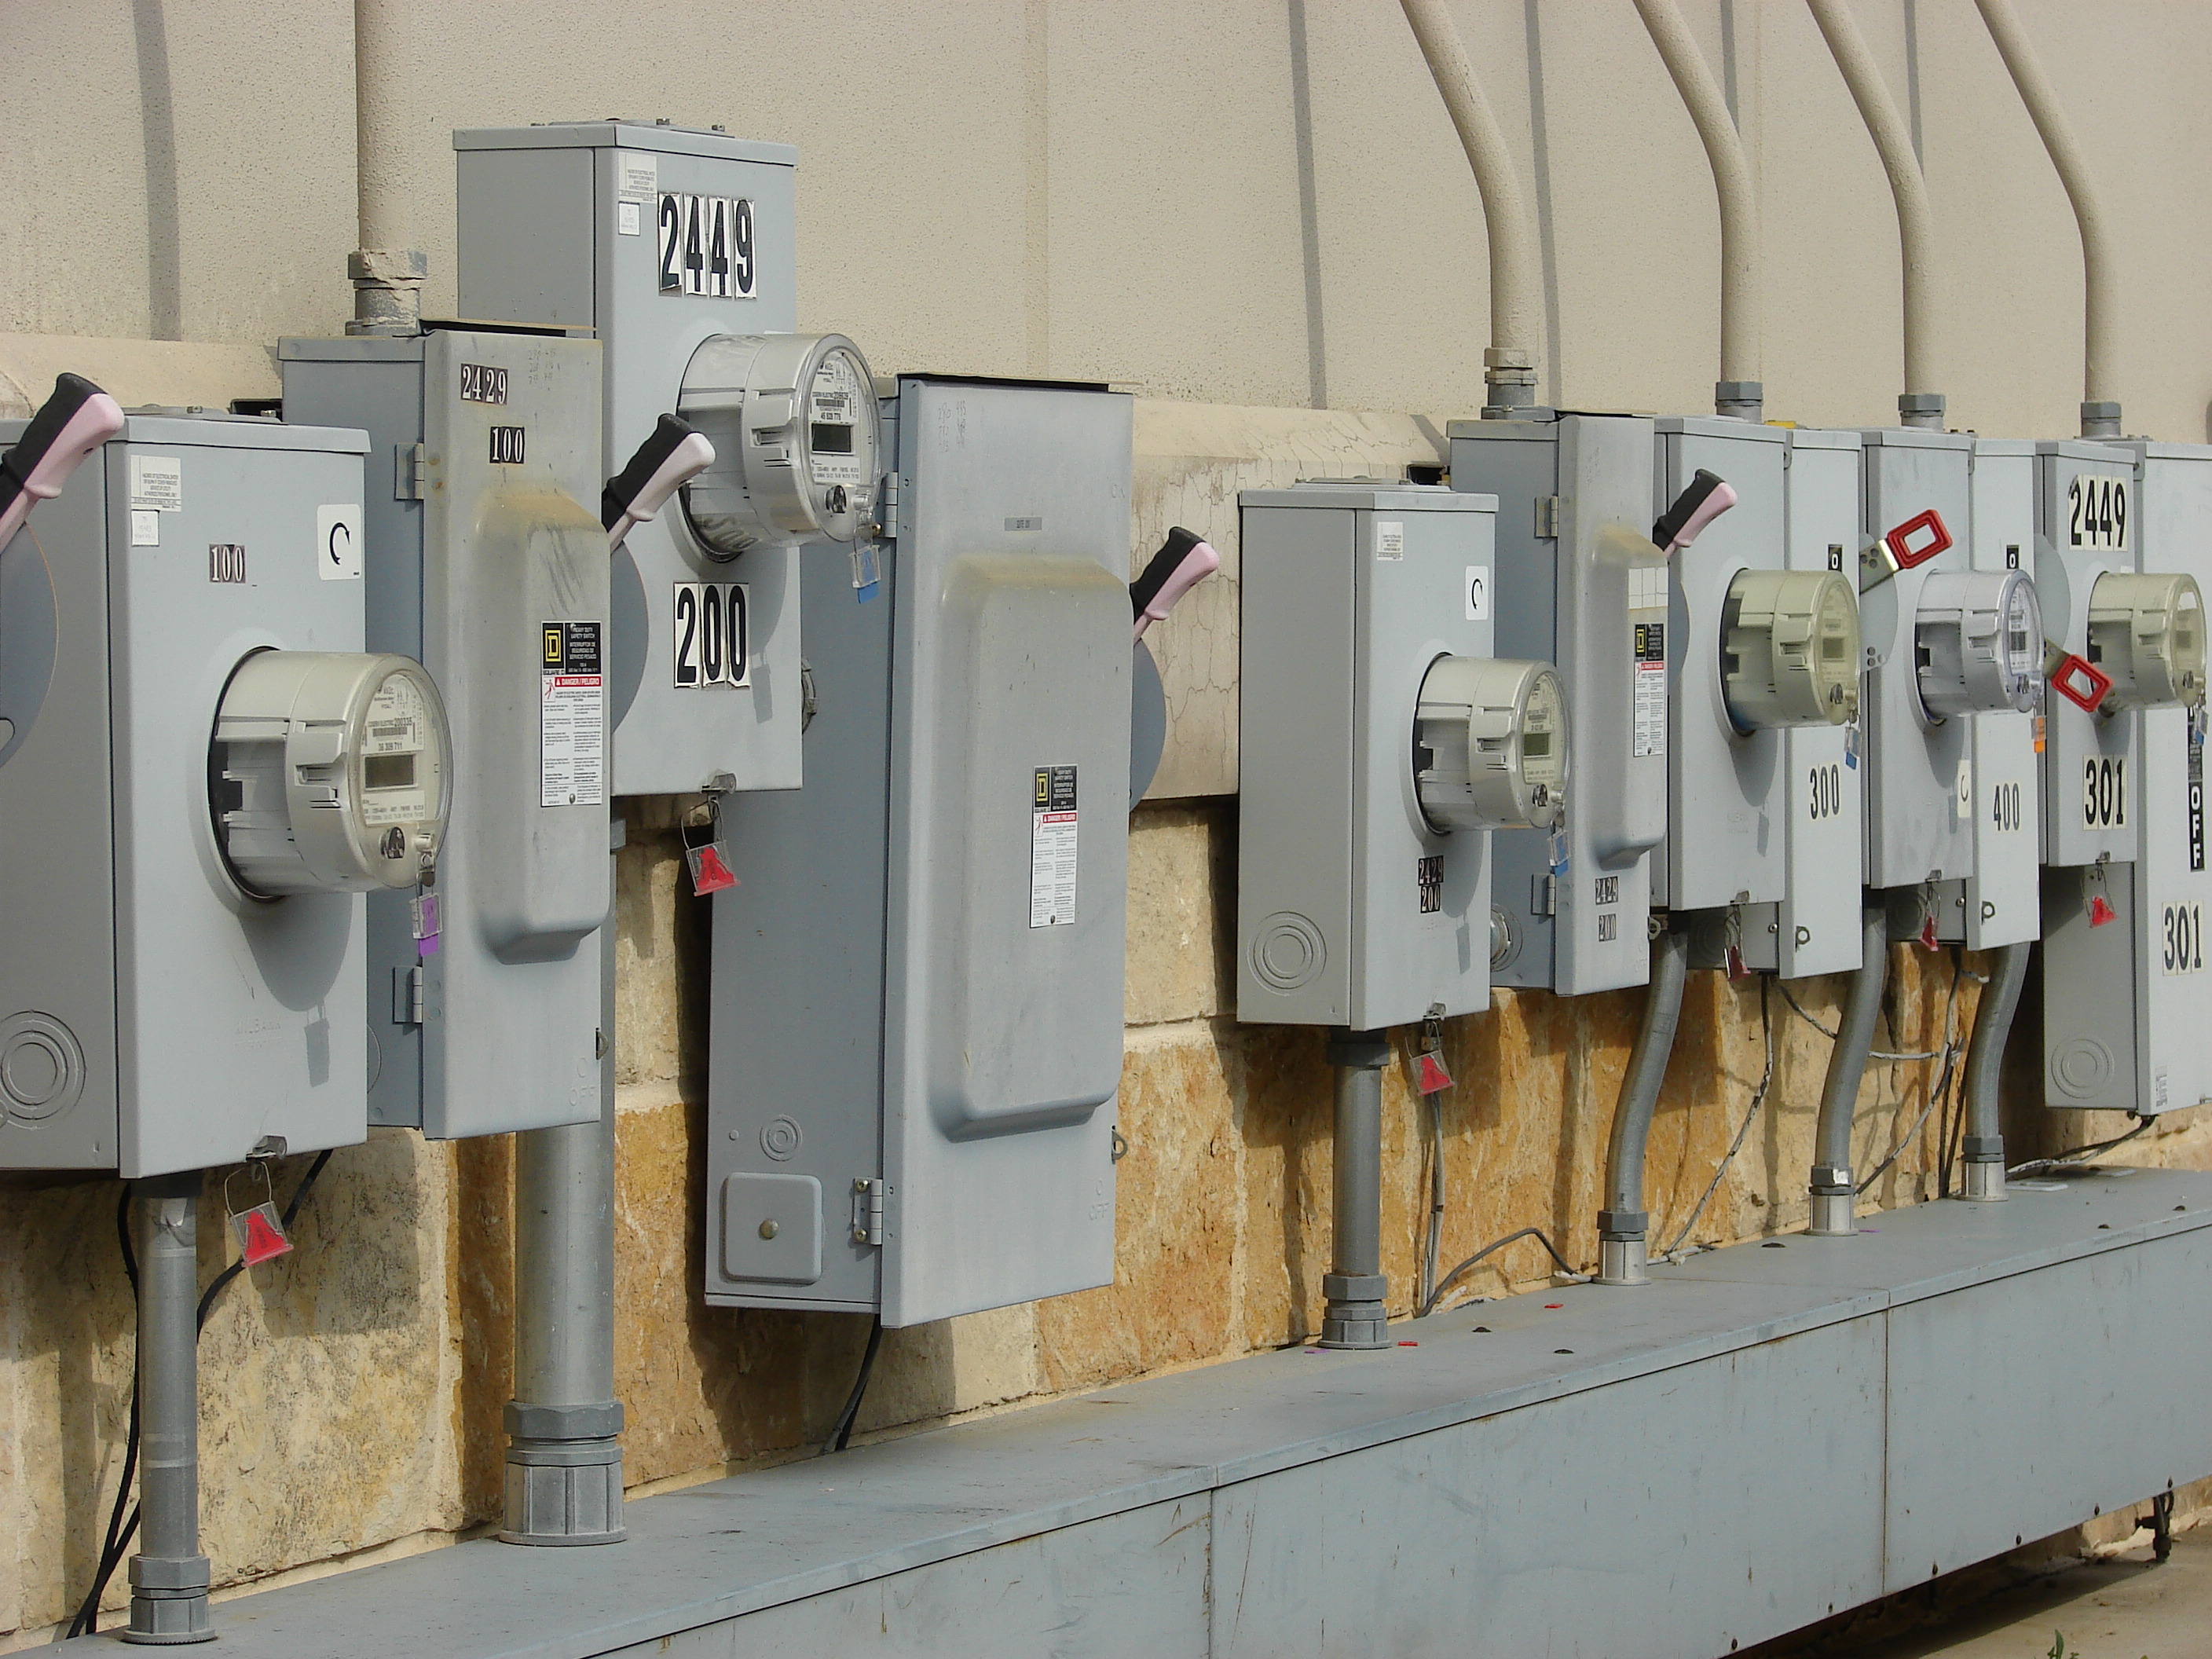 Electric meter boxes courtesy of Wikimedia